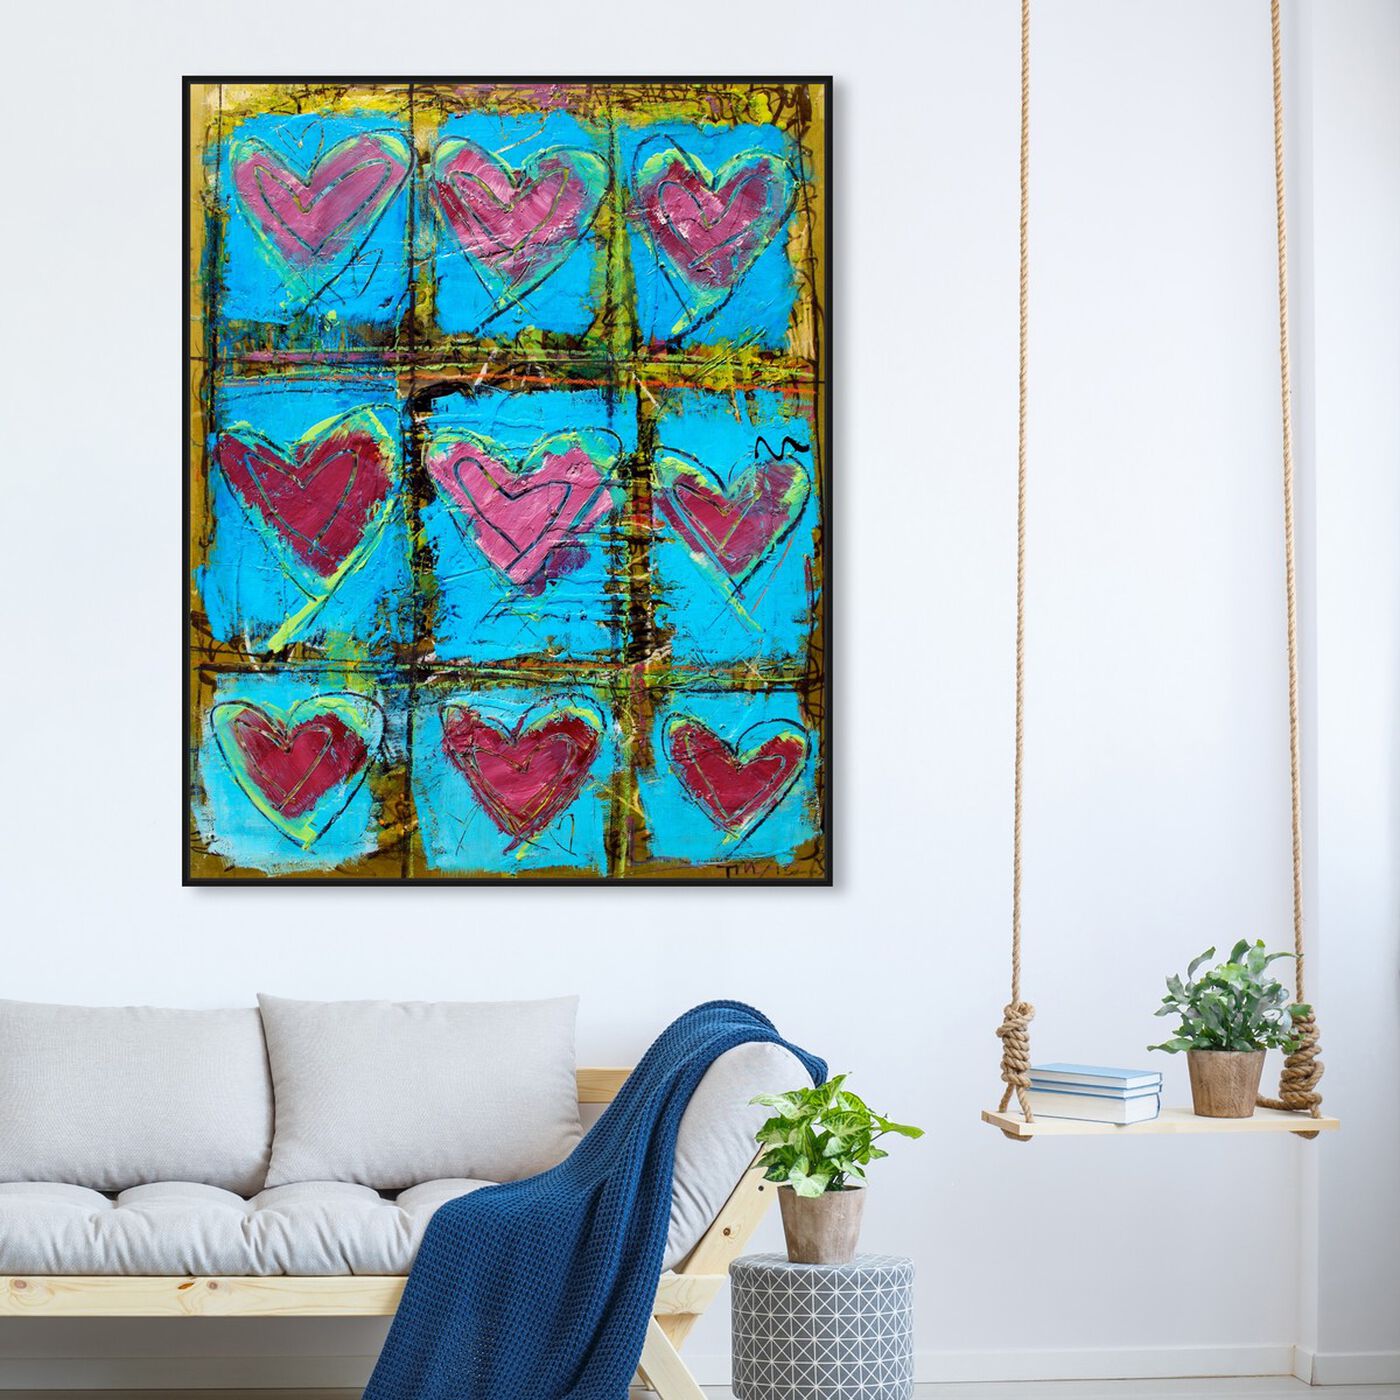 Hanging view of LoveTEAL by Tiago Magro featuring abstract and textures art.